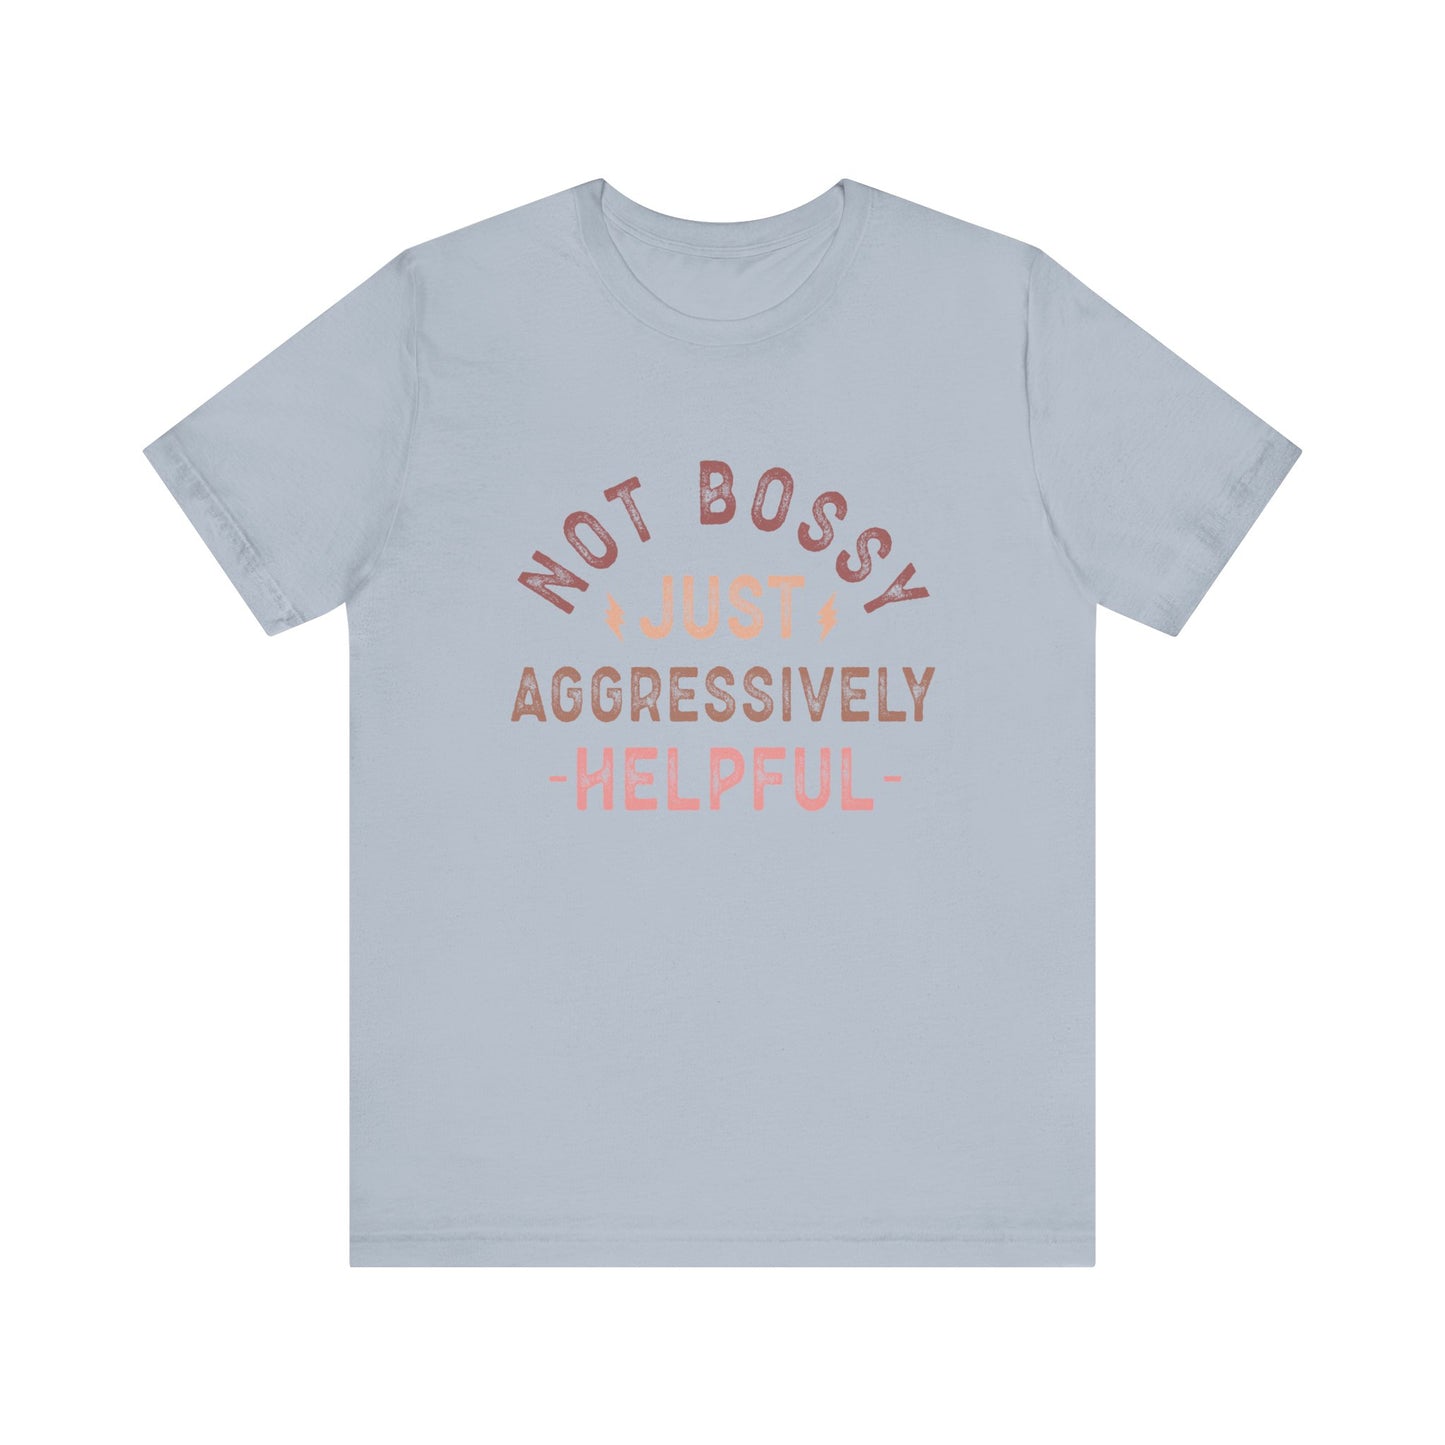 Not Bossy Just Aggressively Helpful Funny Women's Short Sleeve Tee